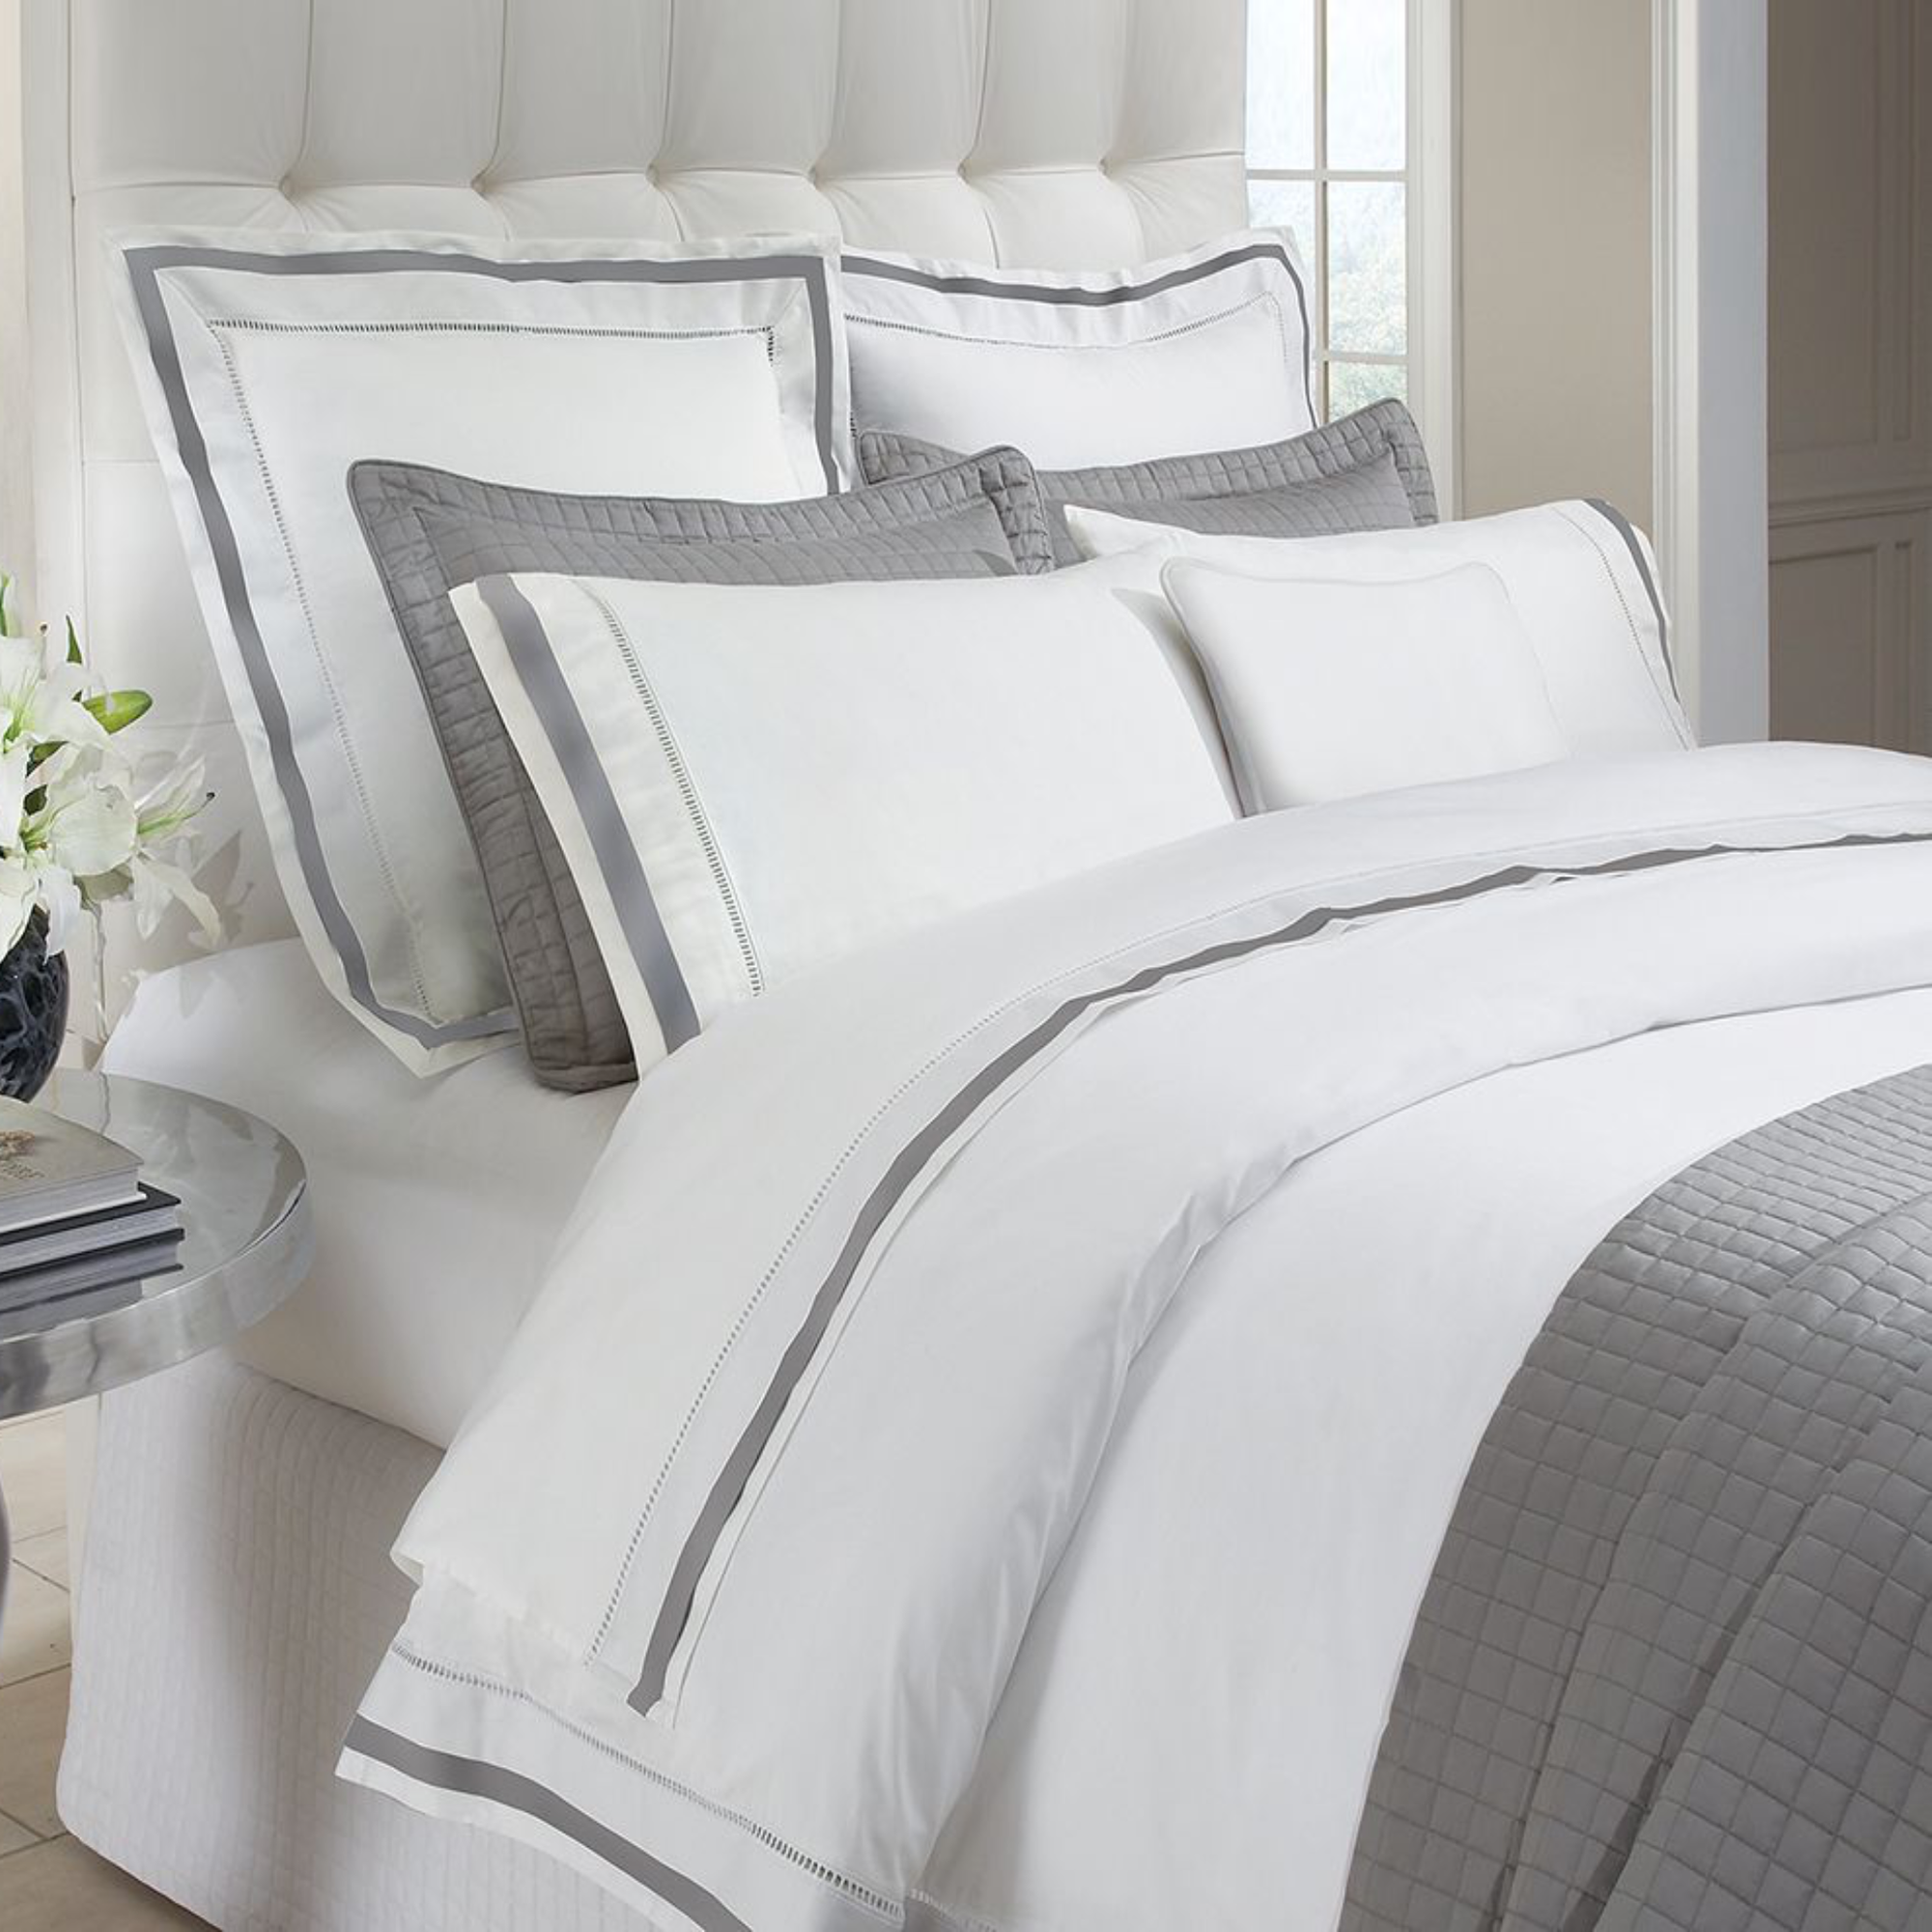 Lifestyle View of Downtown Company Chelsea Bedding in White Gray Color